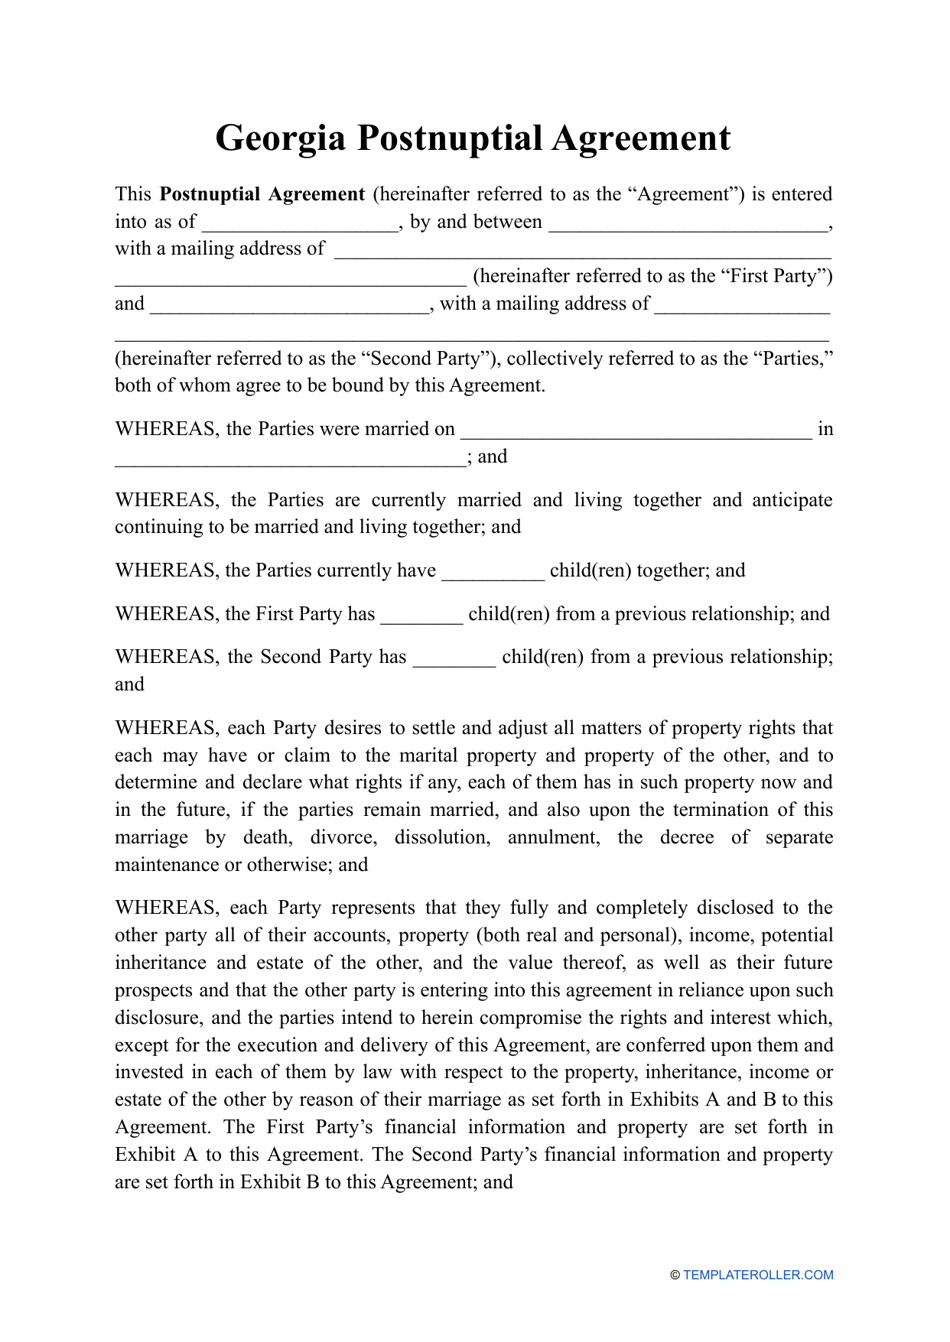 Postnuptial Agreement Template - Georgia (United States), Page 1